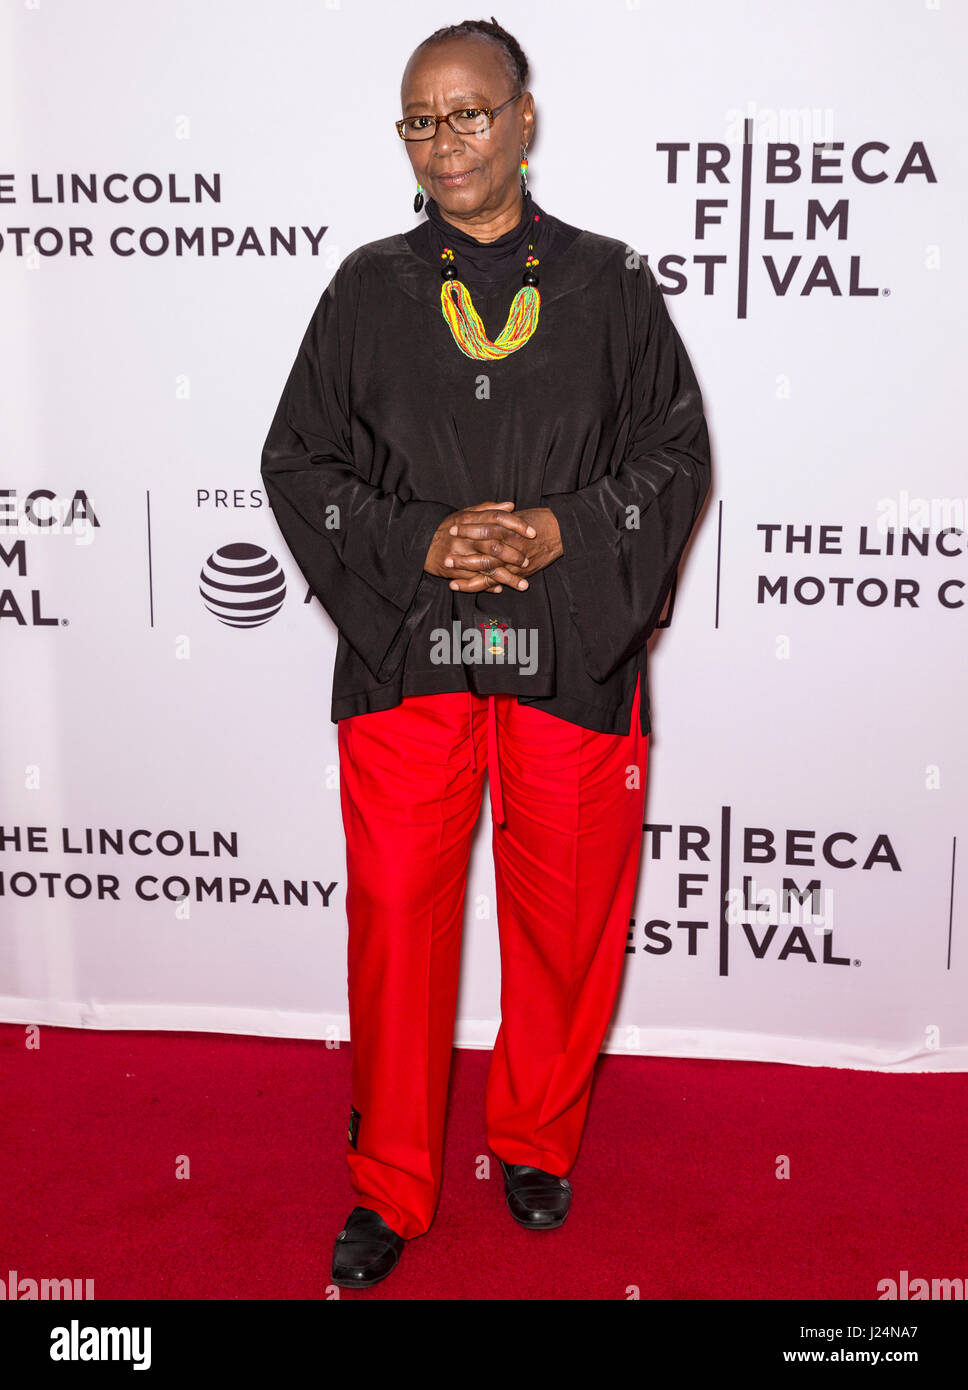 NEW YORK, NY - APRIL 23, 2017: Activist Bertha Lewis attends the 'ACORN and the Firestorm' Premiere during the 2017 Tribeca Film Festival at Cinepolis Stock Photo